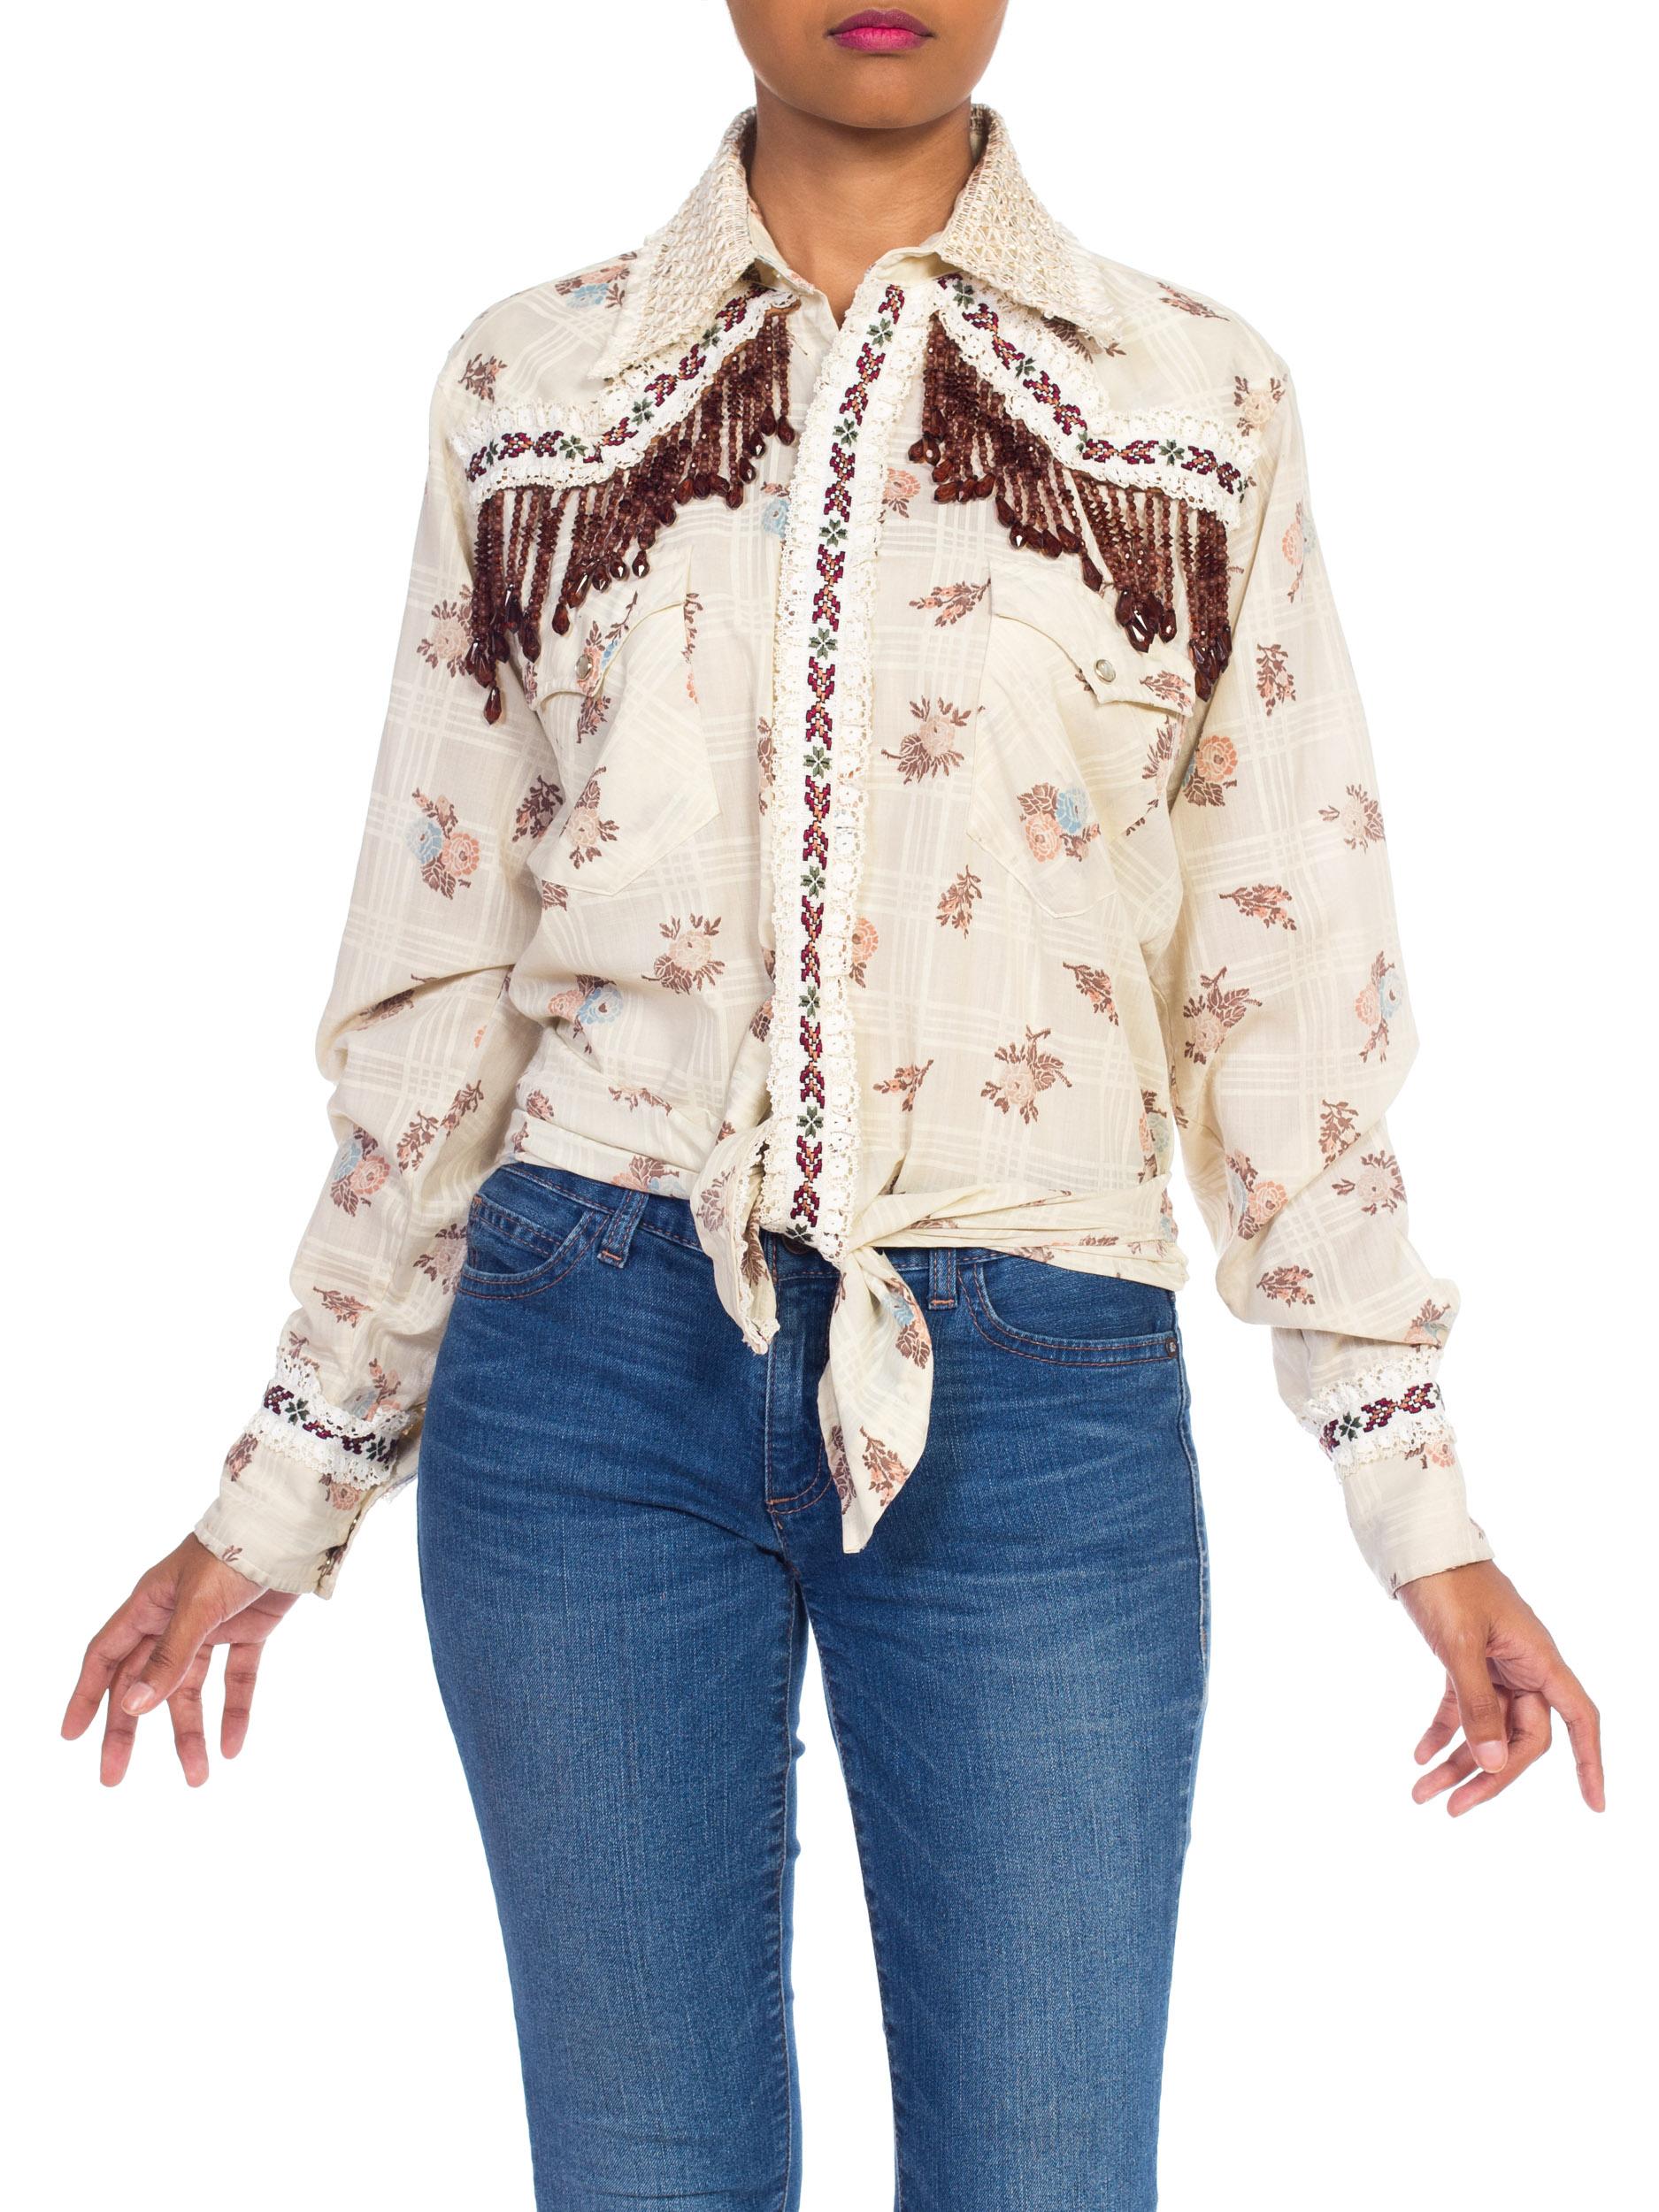 Women's 1970s Wrangler Floral Print Western Top With Lace and Ribbon